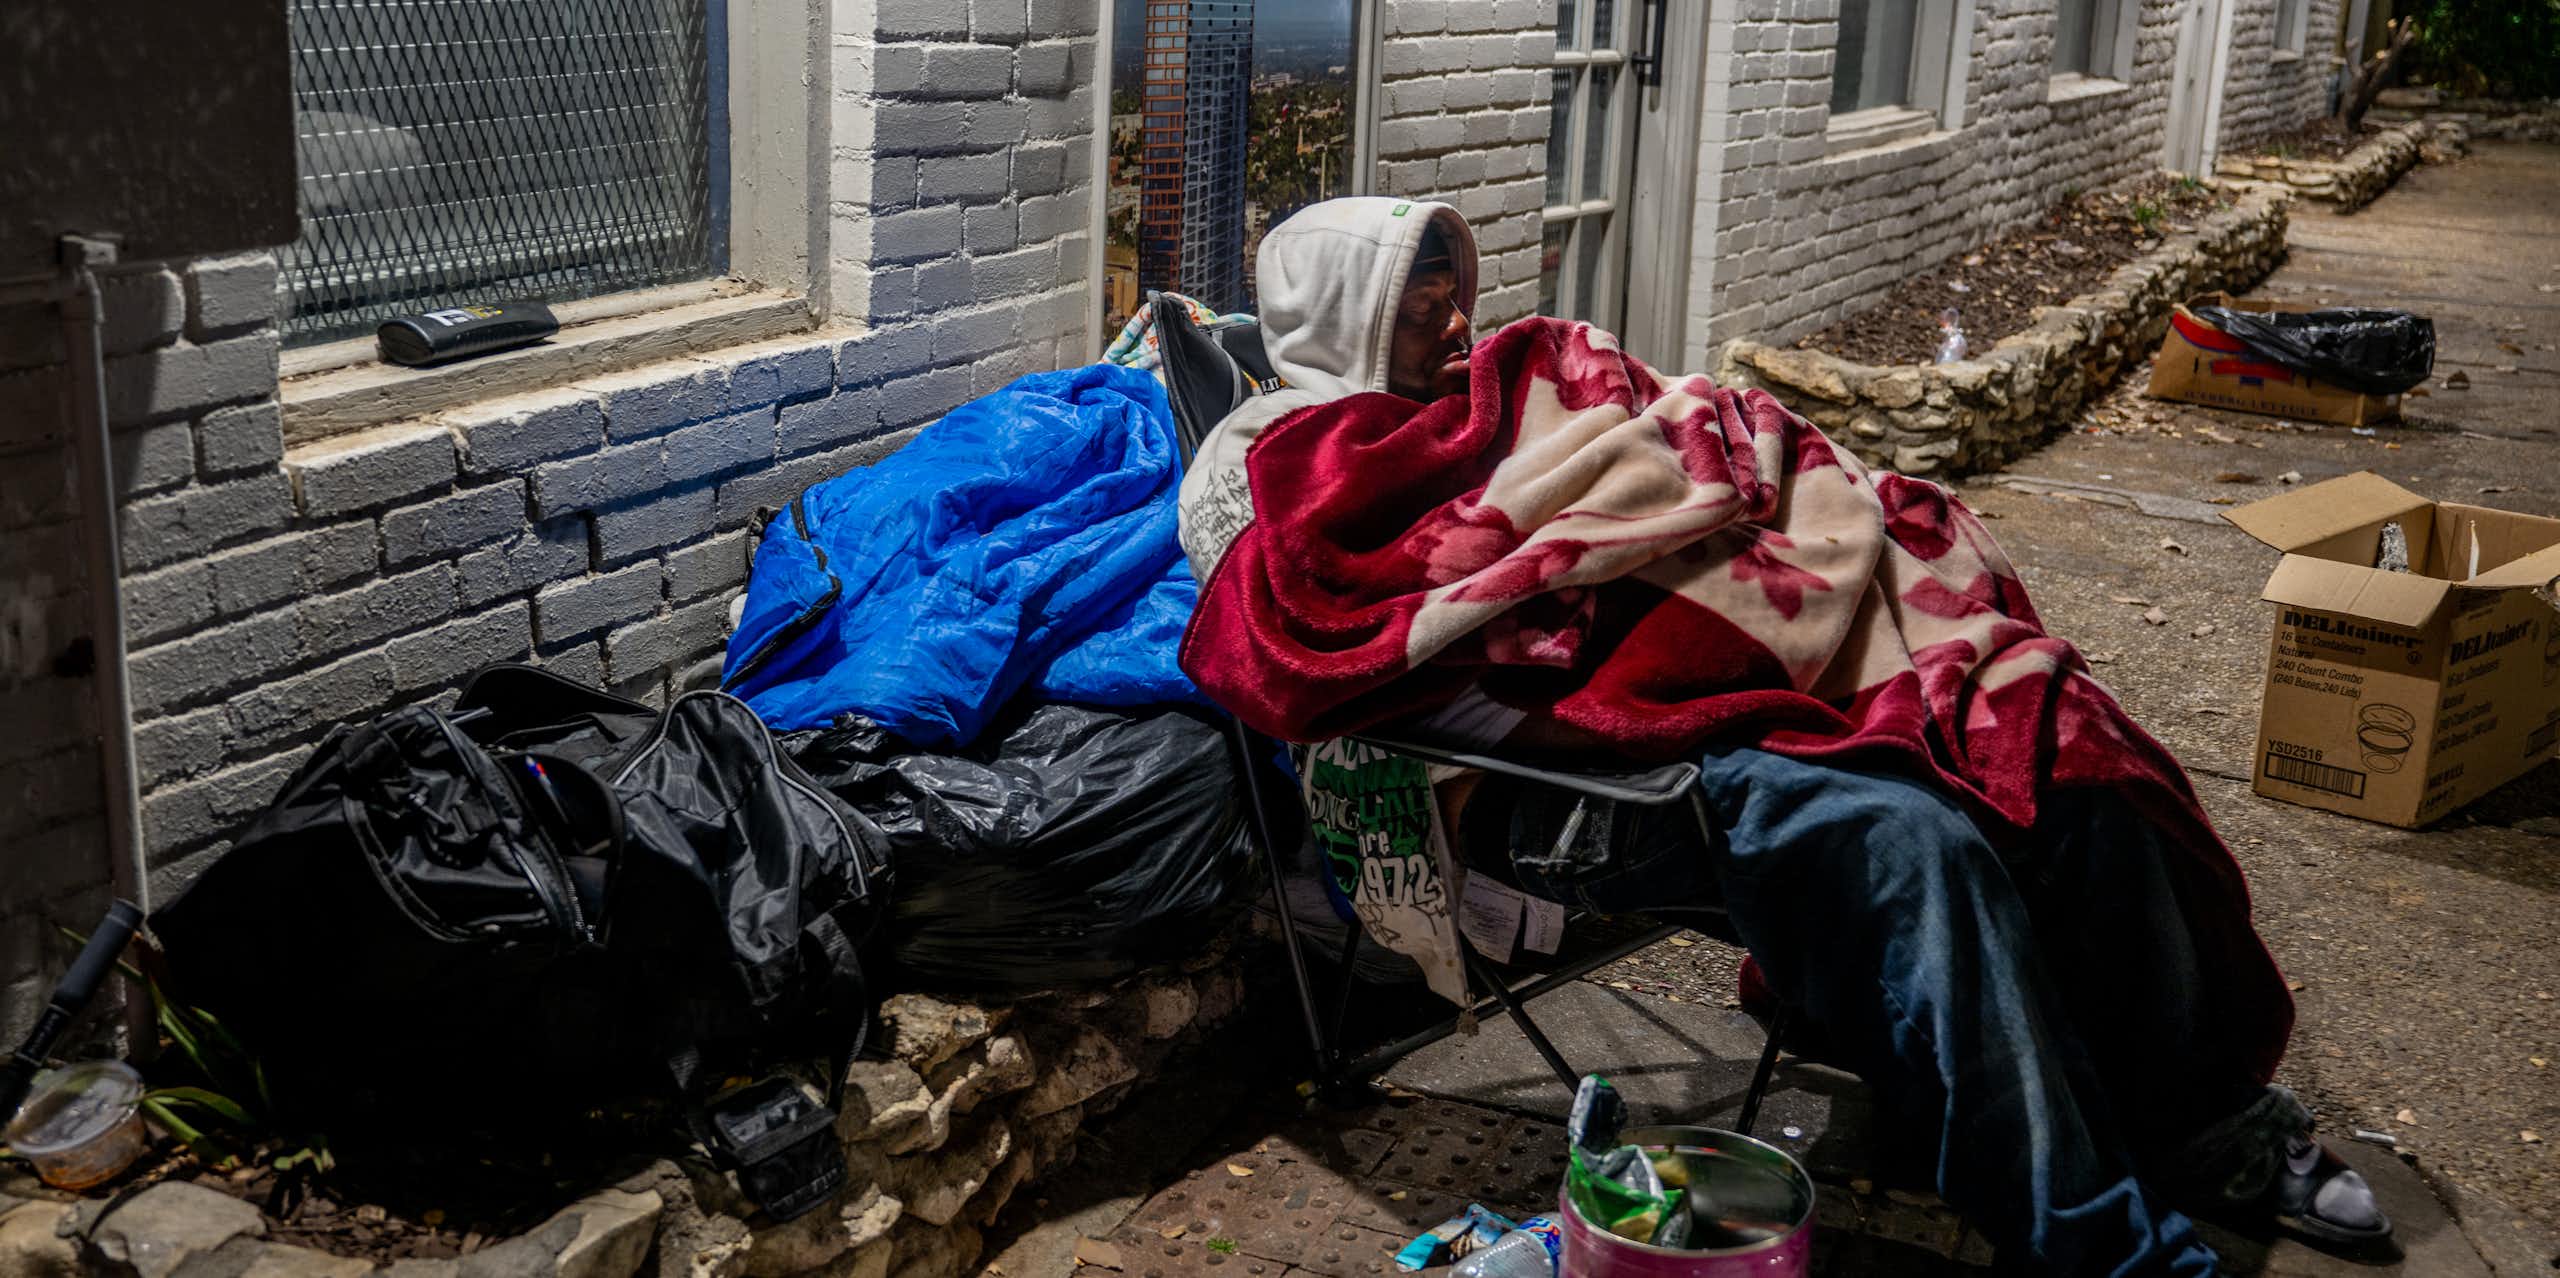 A man wrapped in blankets sits in a chair on a sidewalk near plastic bags and trash.